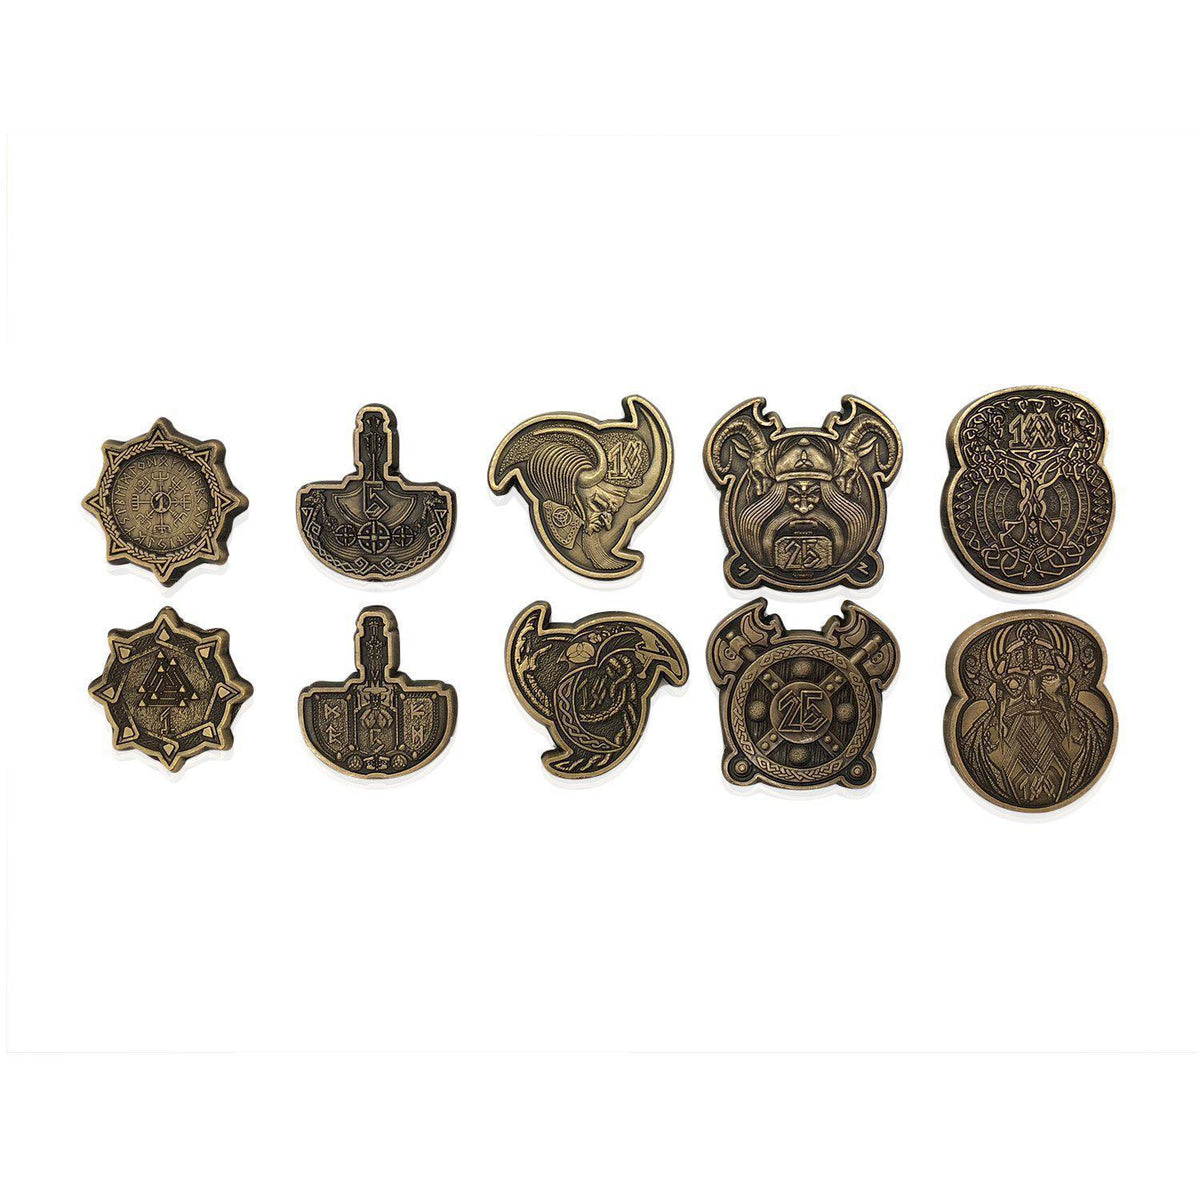 Adventure Coins - Norse Metal Coins Set of 10-Coins-Norse Foundry-DND Dice-Polyhedral Dice-D20-Metal Dice-Precision Dice-Luxury Dice-Dungeons and Dragons-D&amp;D-